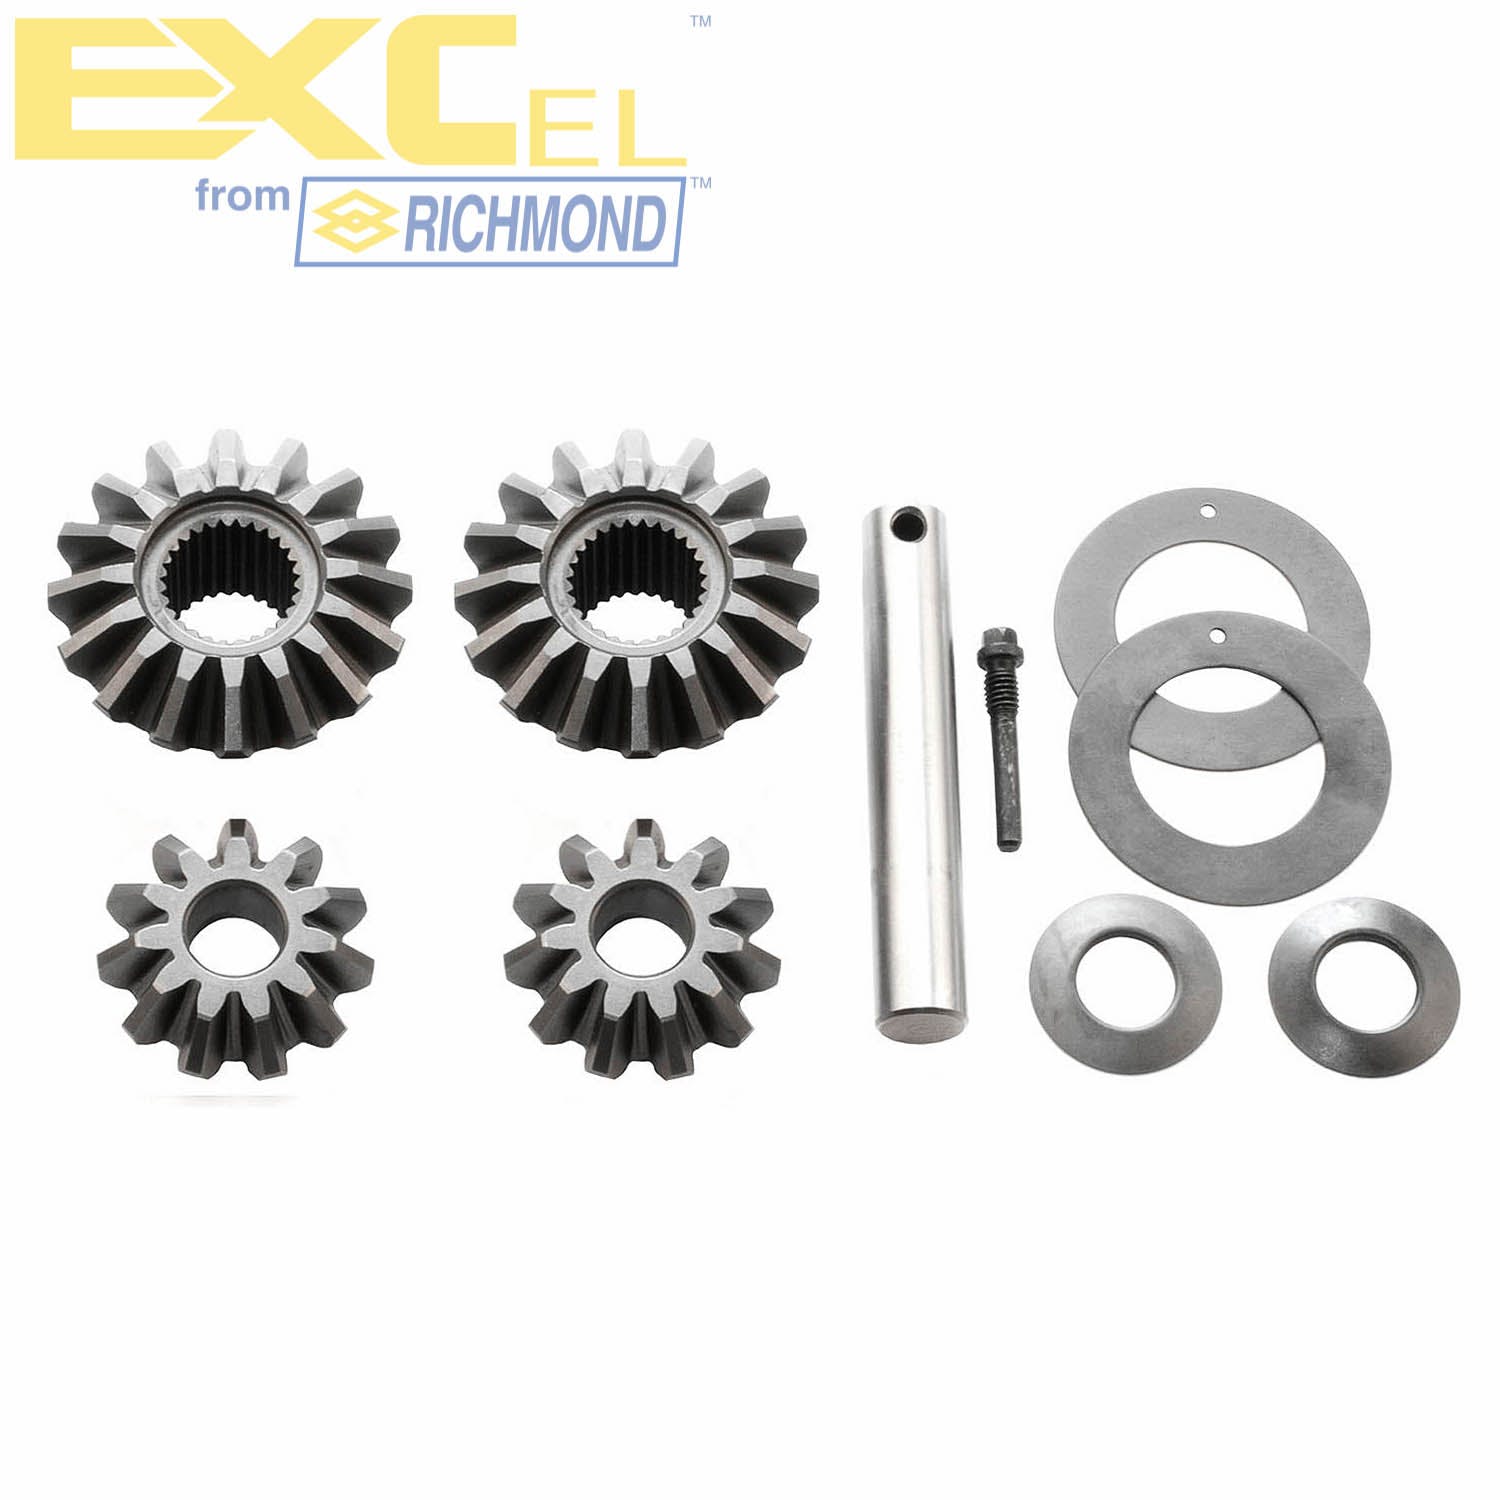 Excel XL-4003 Differential Carrier Gear Kit